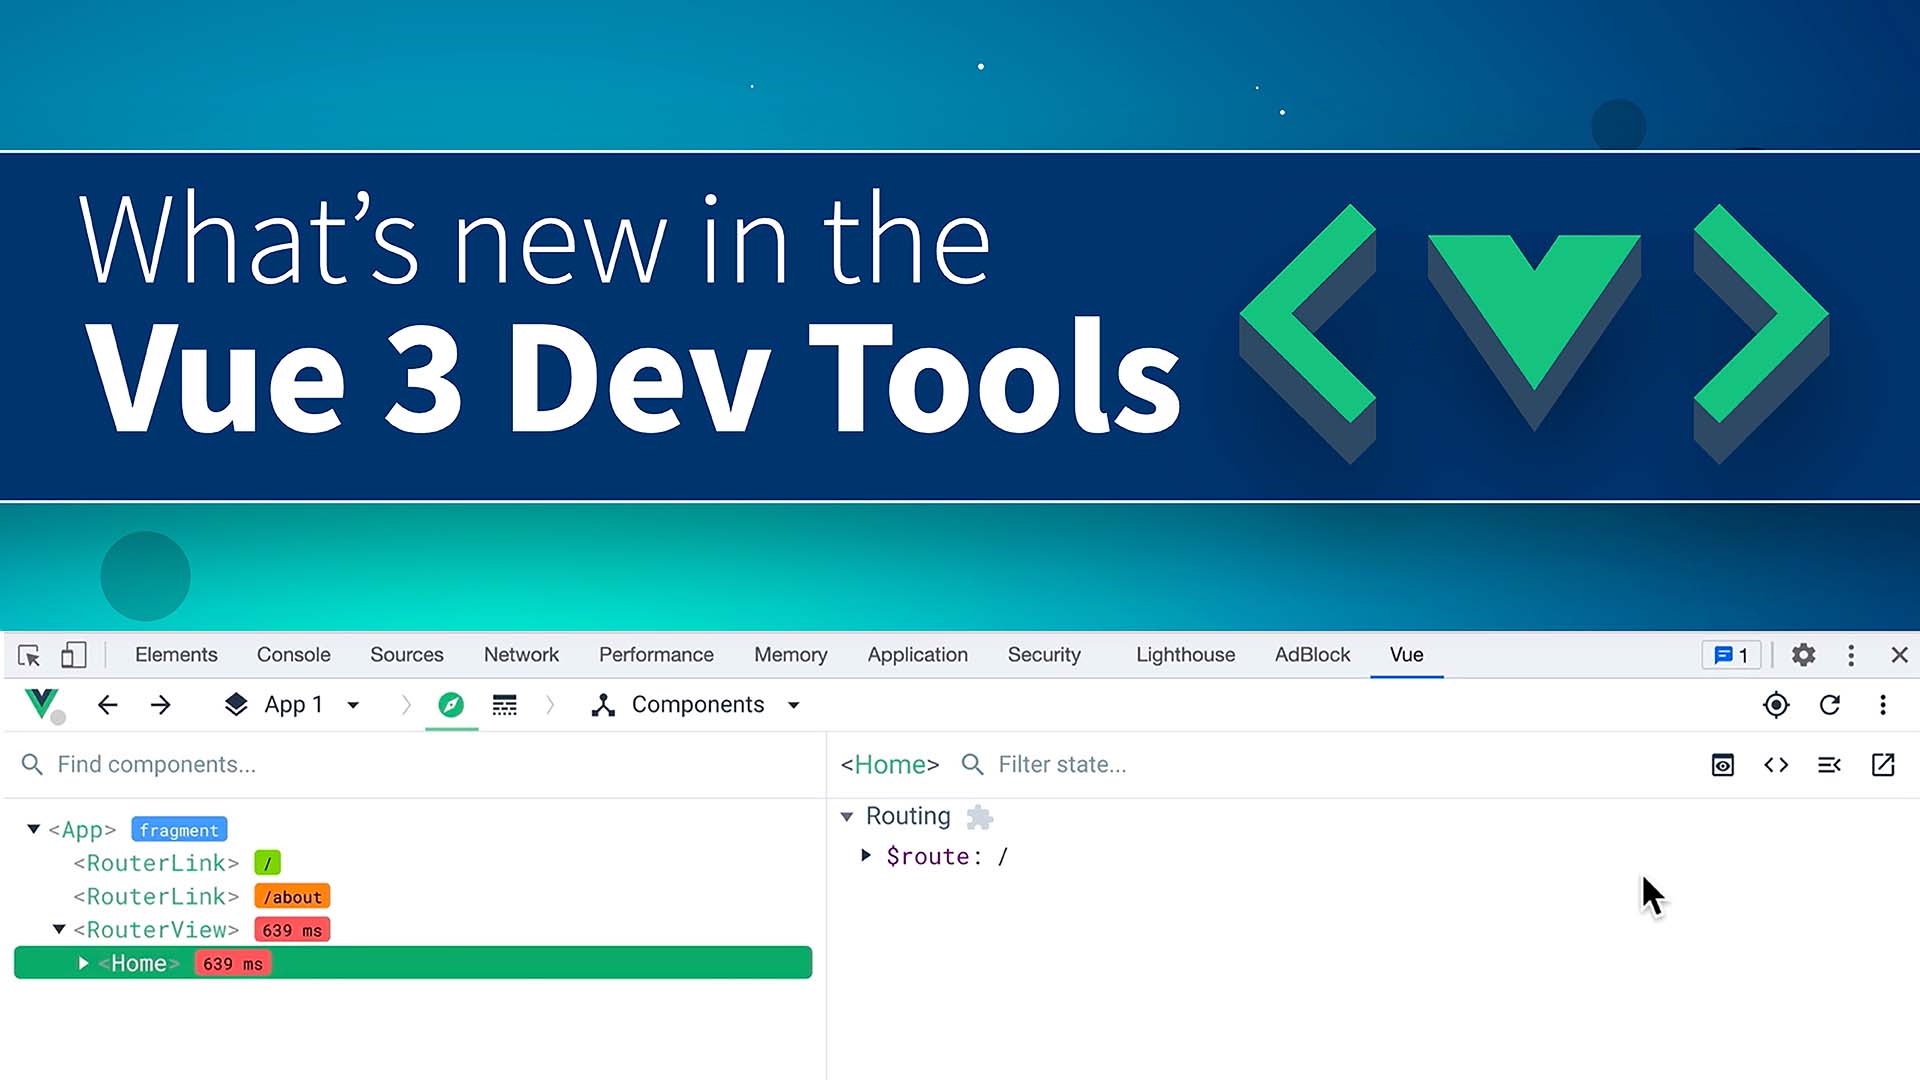 What's new in the Vue 3 Dev Tools